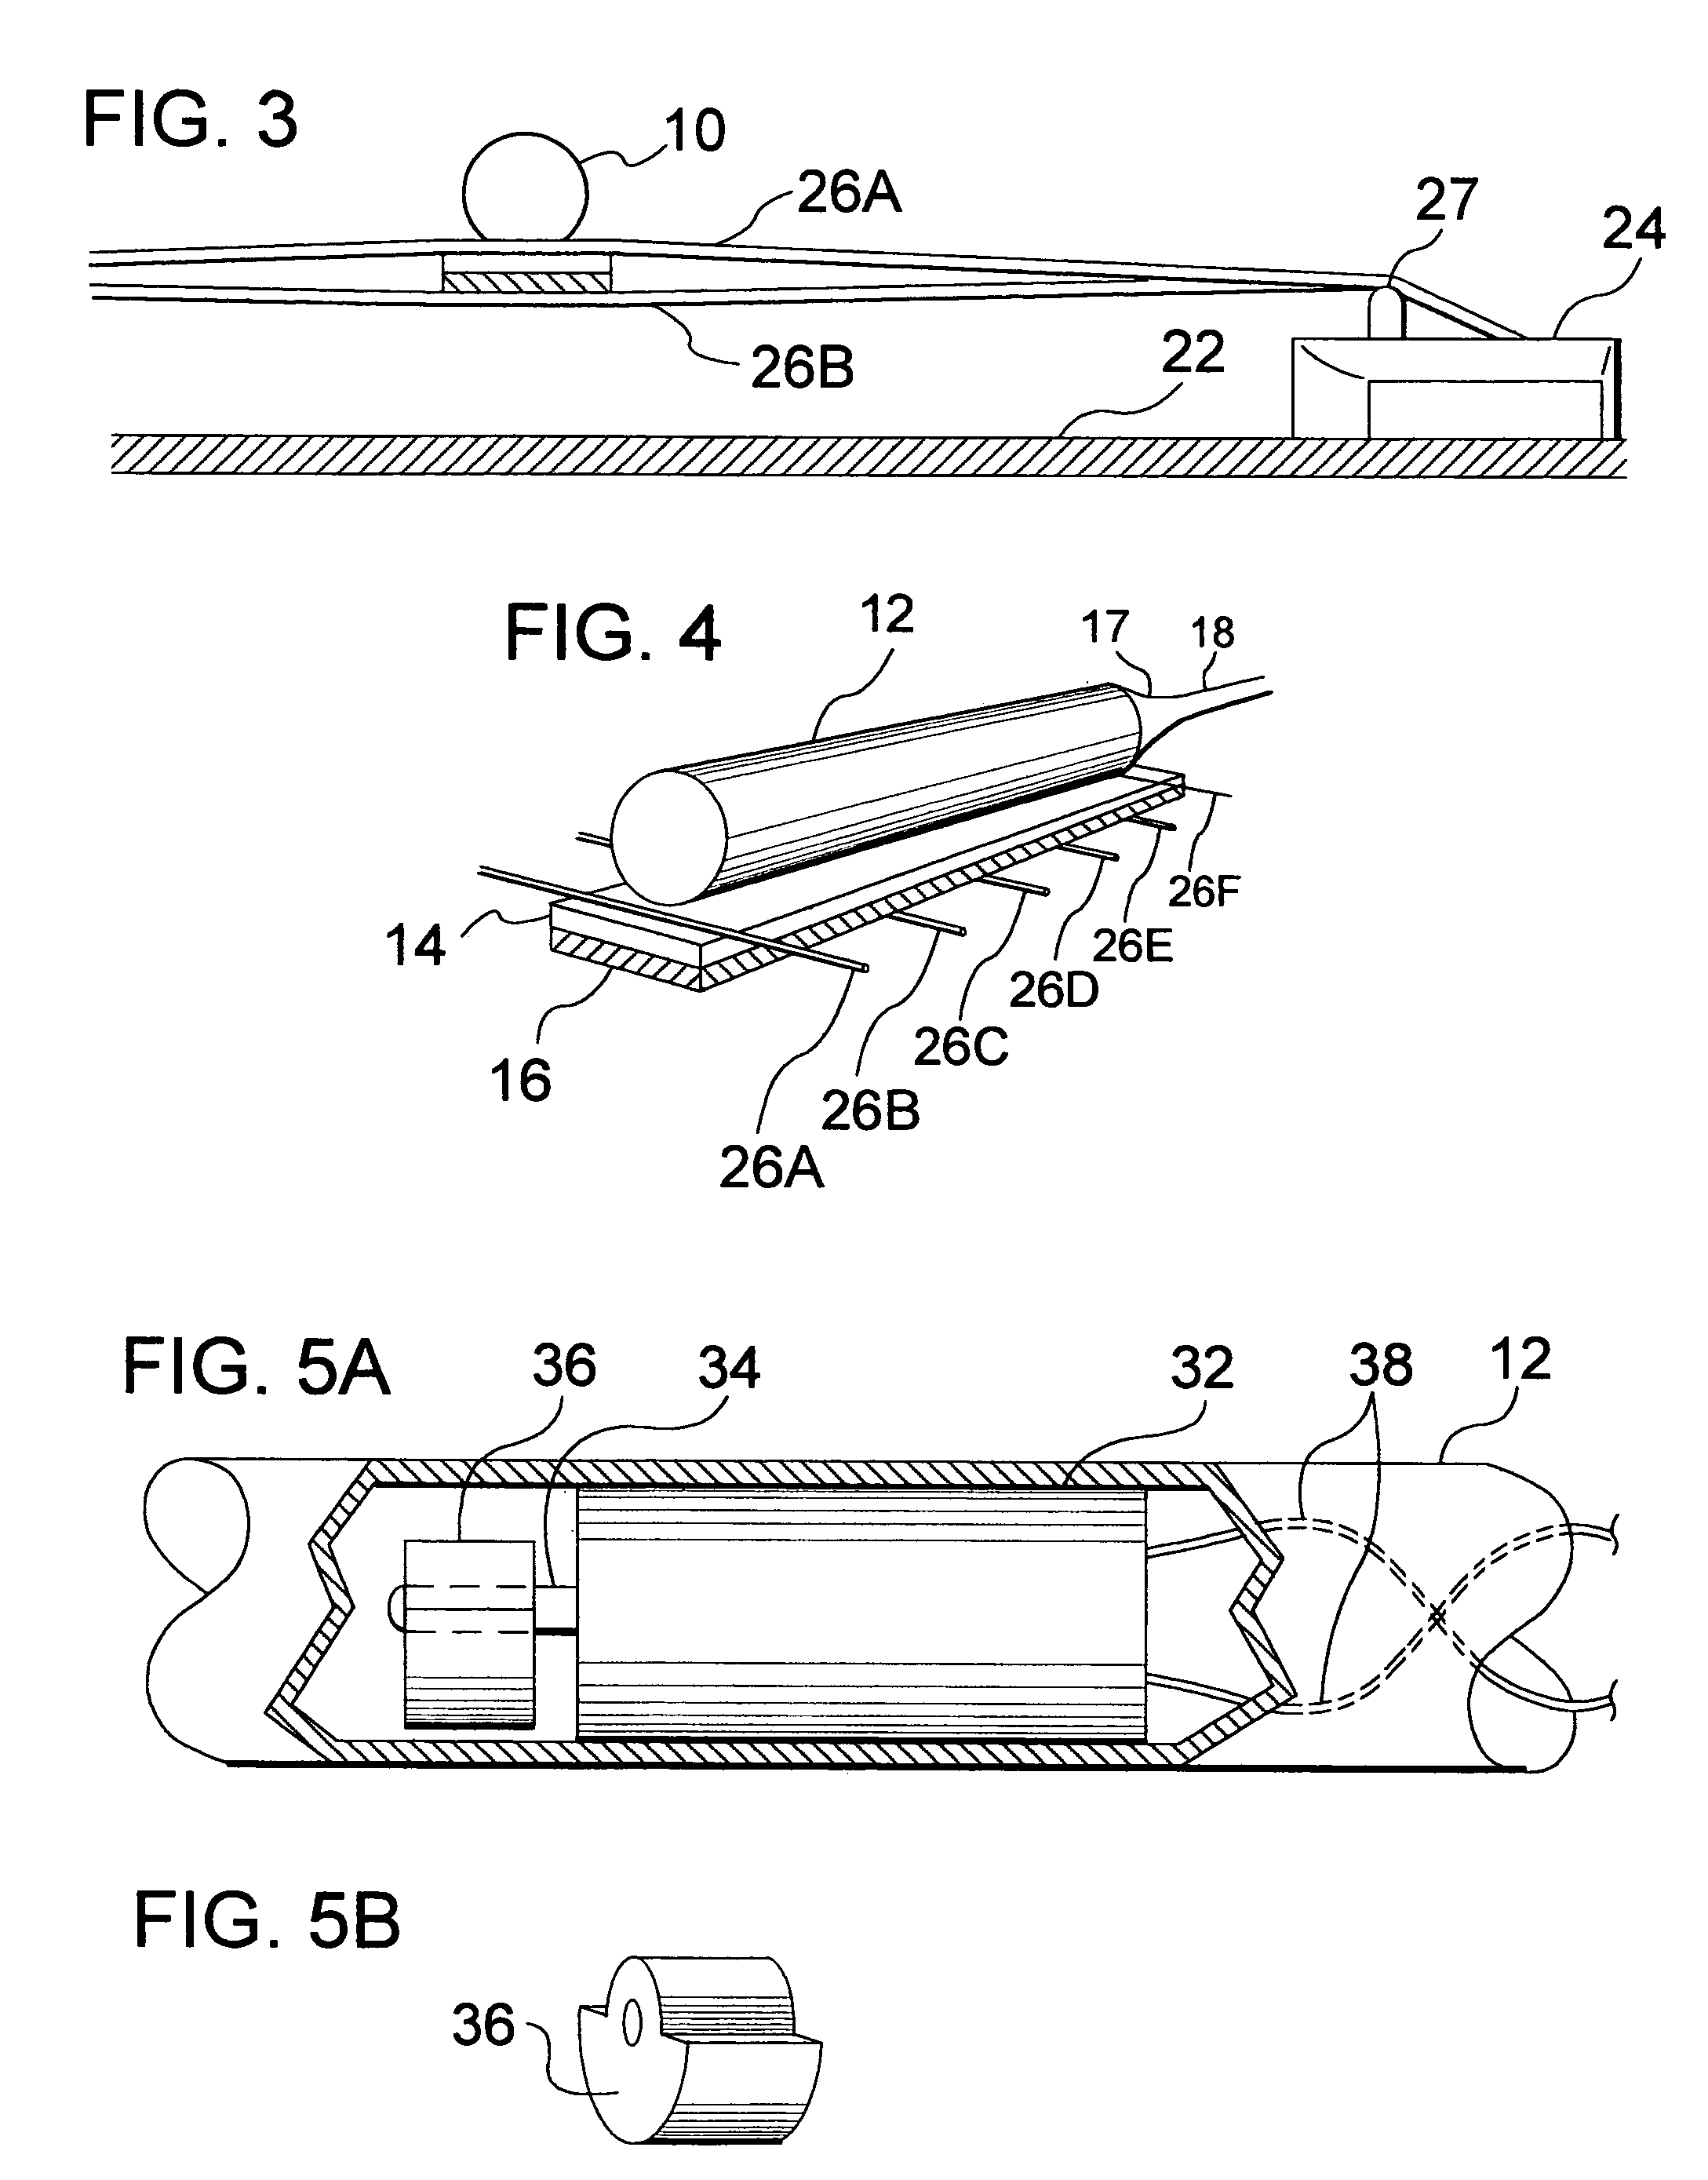 String-mounted conditioner for stringed musical instruments